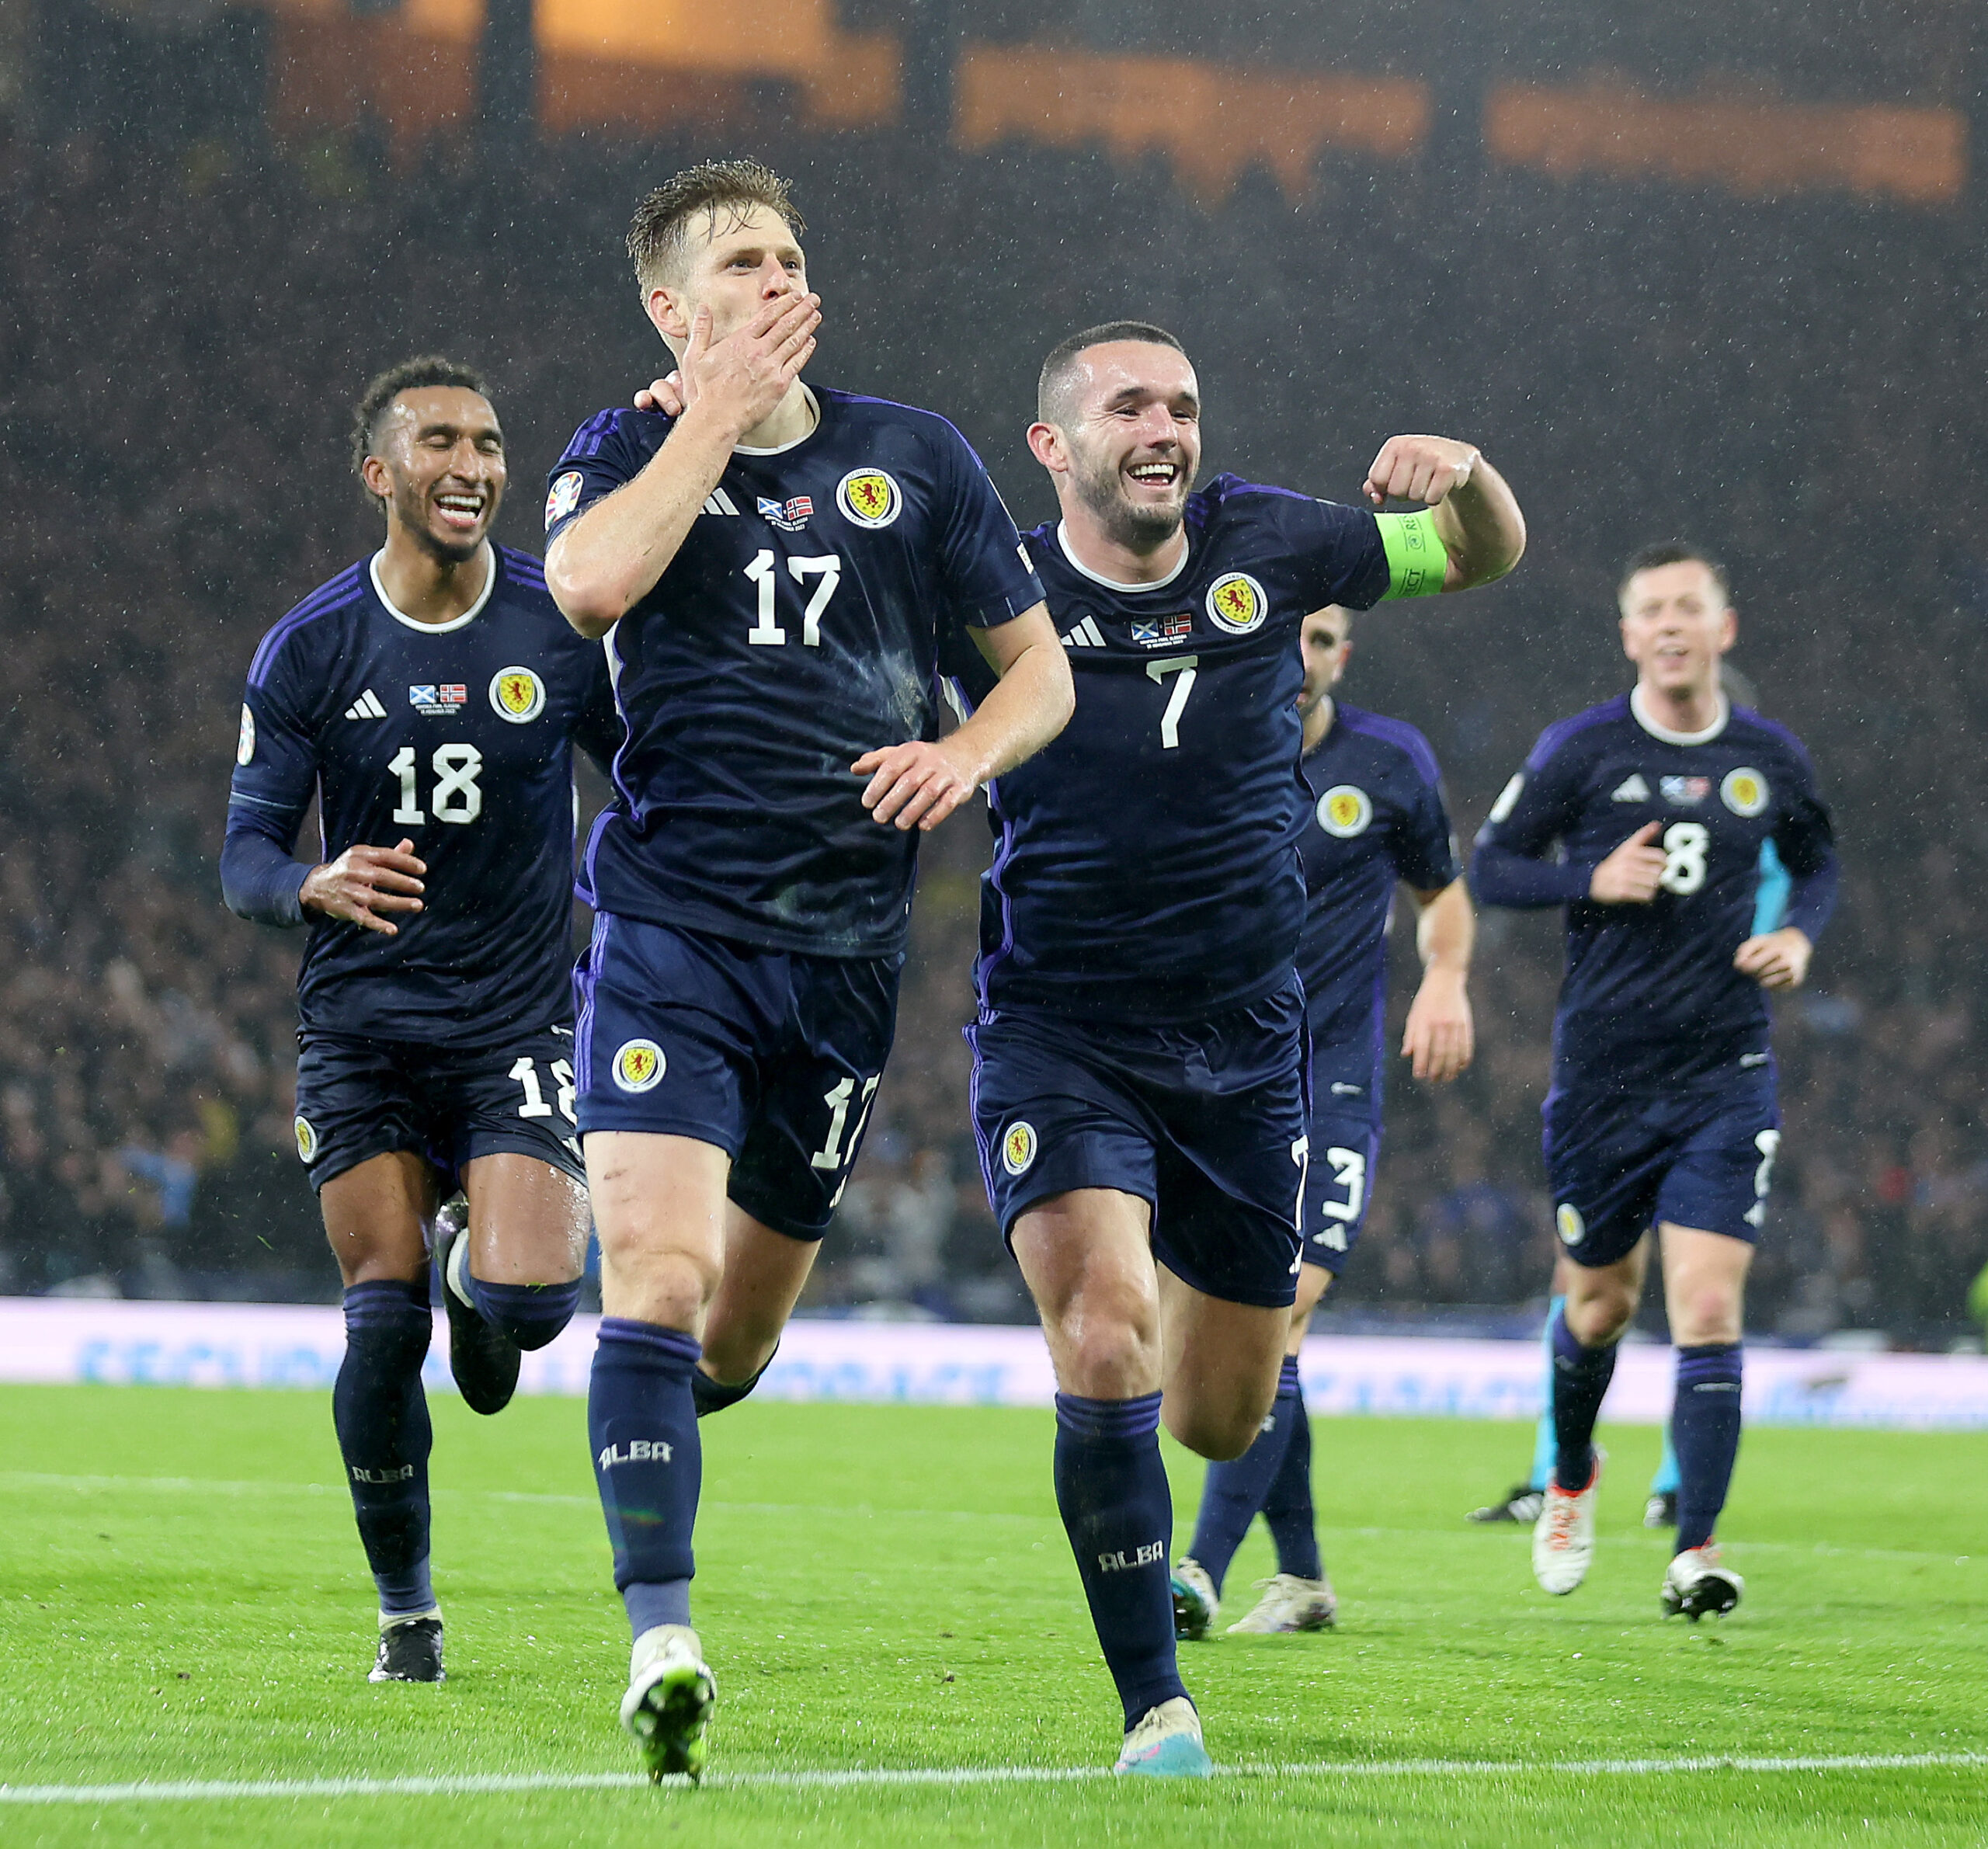 Scotland's triumphant Euro 2024 qualifying season ended with a thrilling draw as Mohamed Elyounoussi's late leveler earned Norway a point at Hampden.